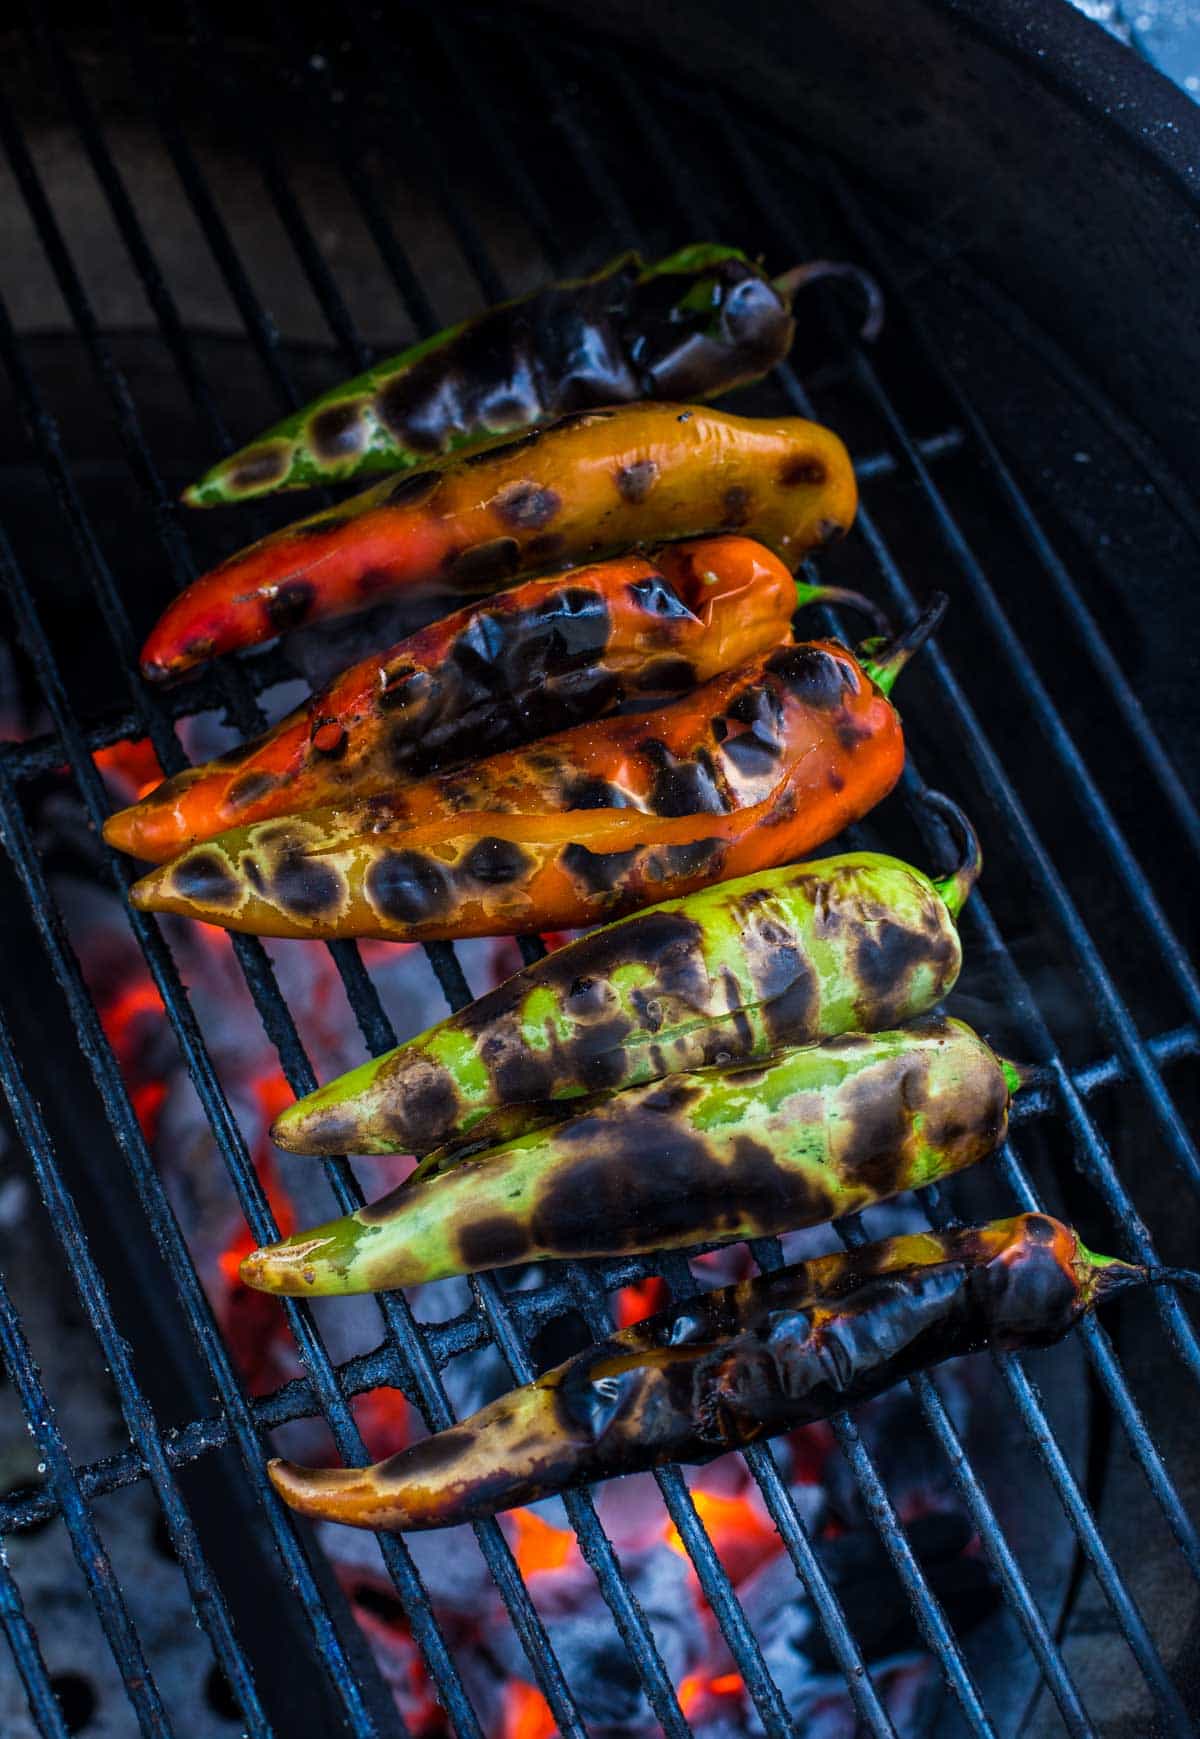 Green chile peppers grilled with blister marks ready to be pulled off.